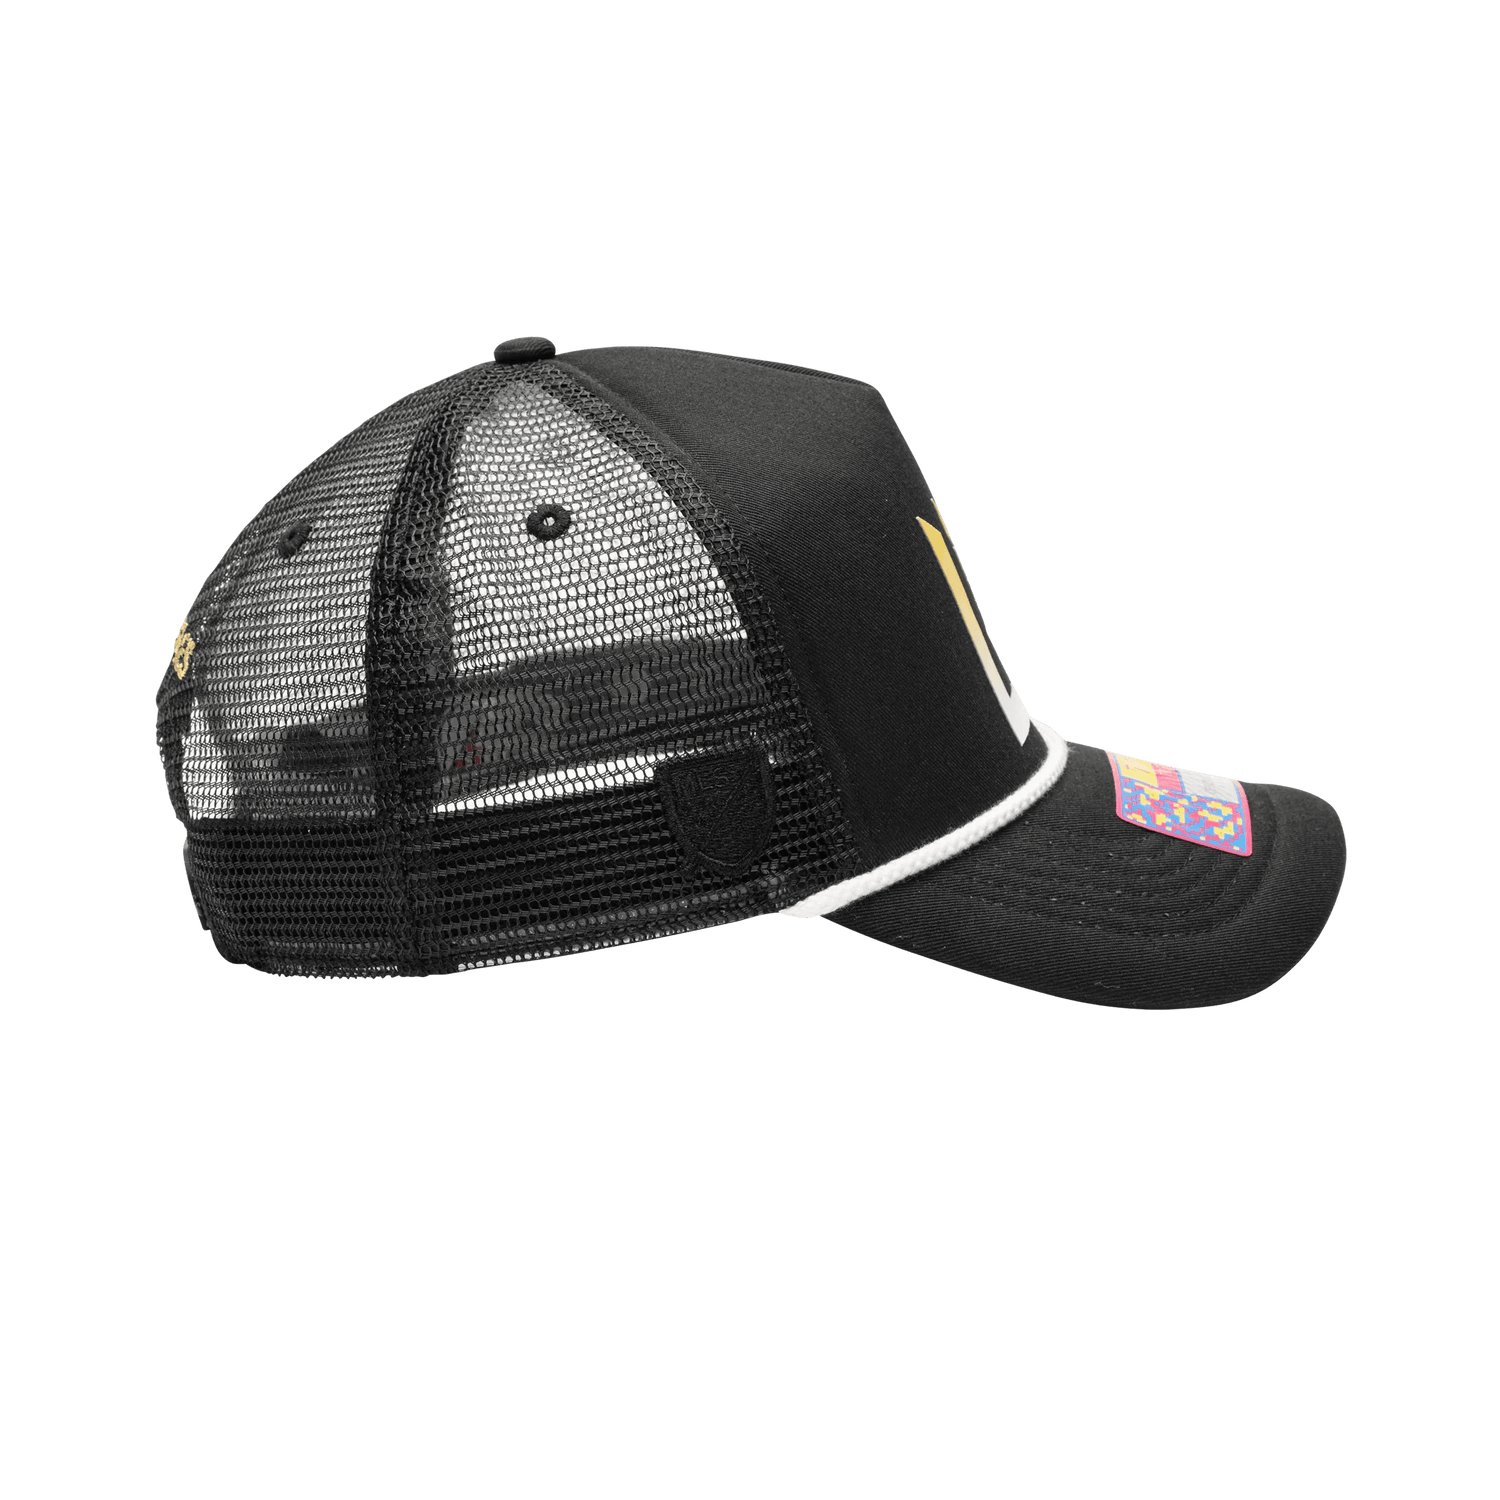 FI Collection LAFC Atmosphere Trucker Hat (Side)